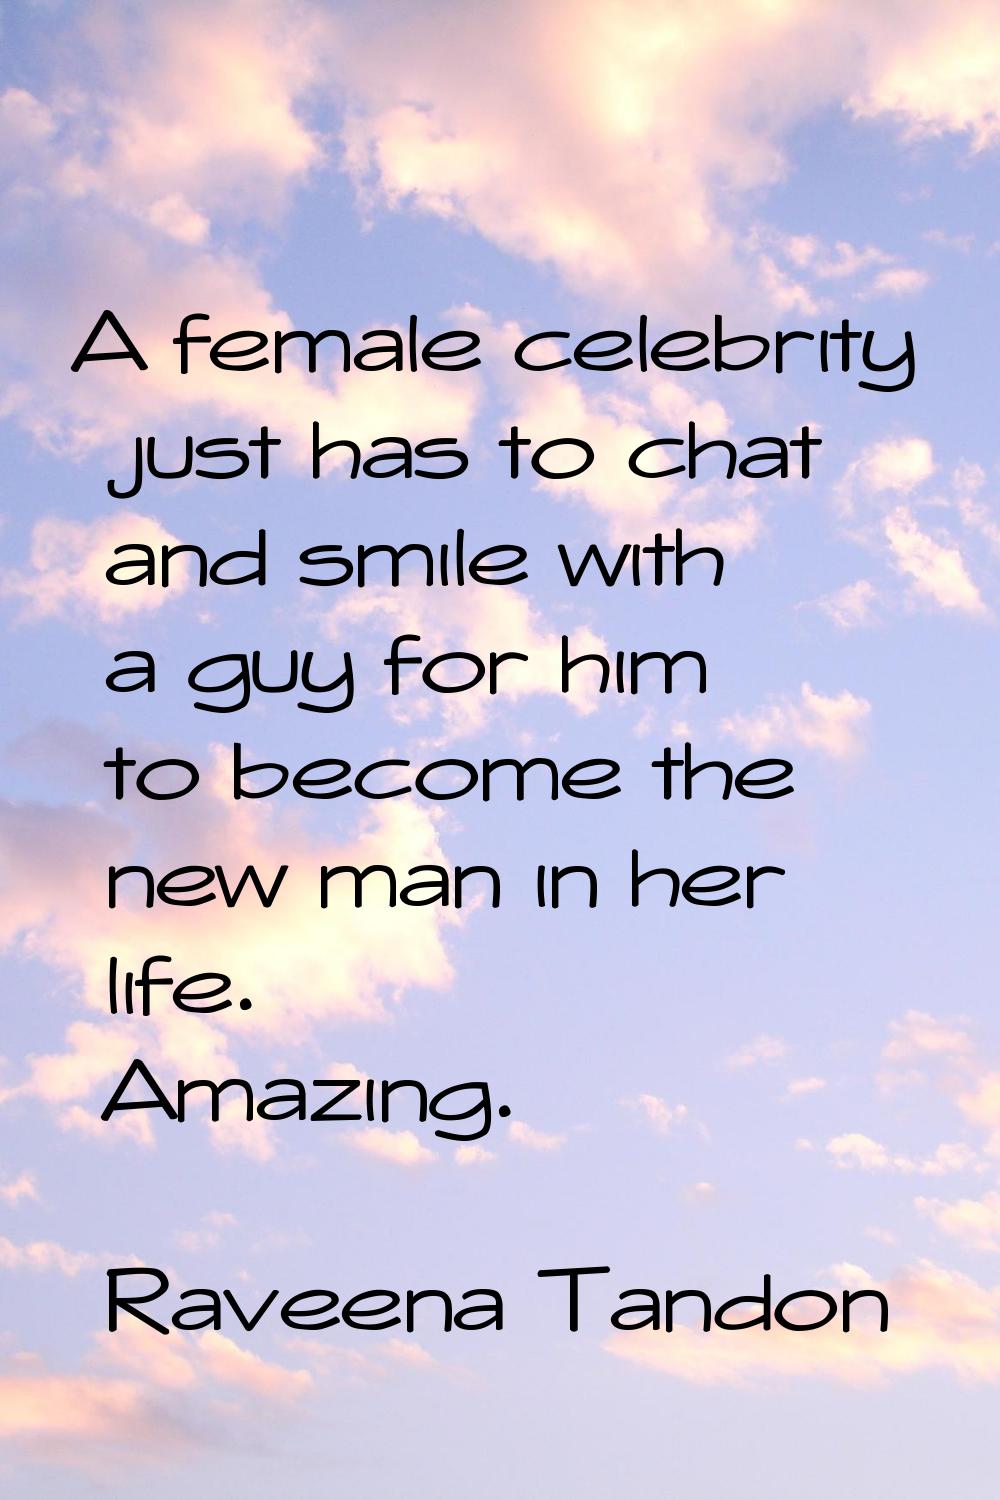 A female celebrity just has to chat and smile with a guy for him to become the new man in her life.